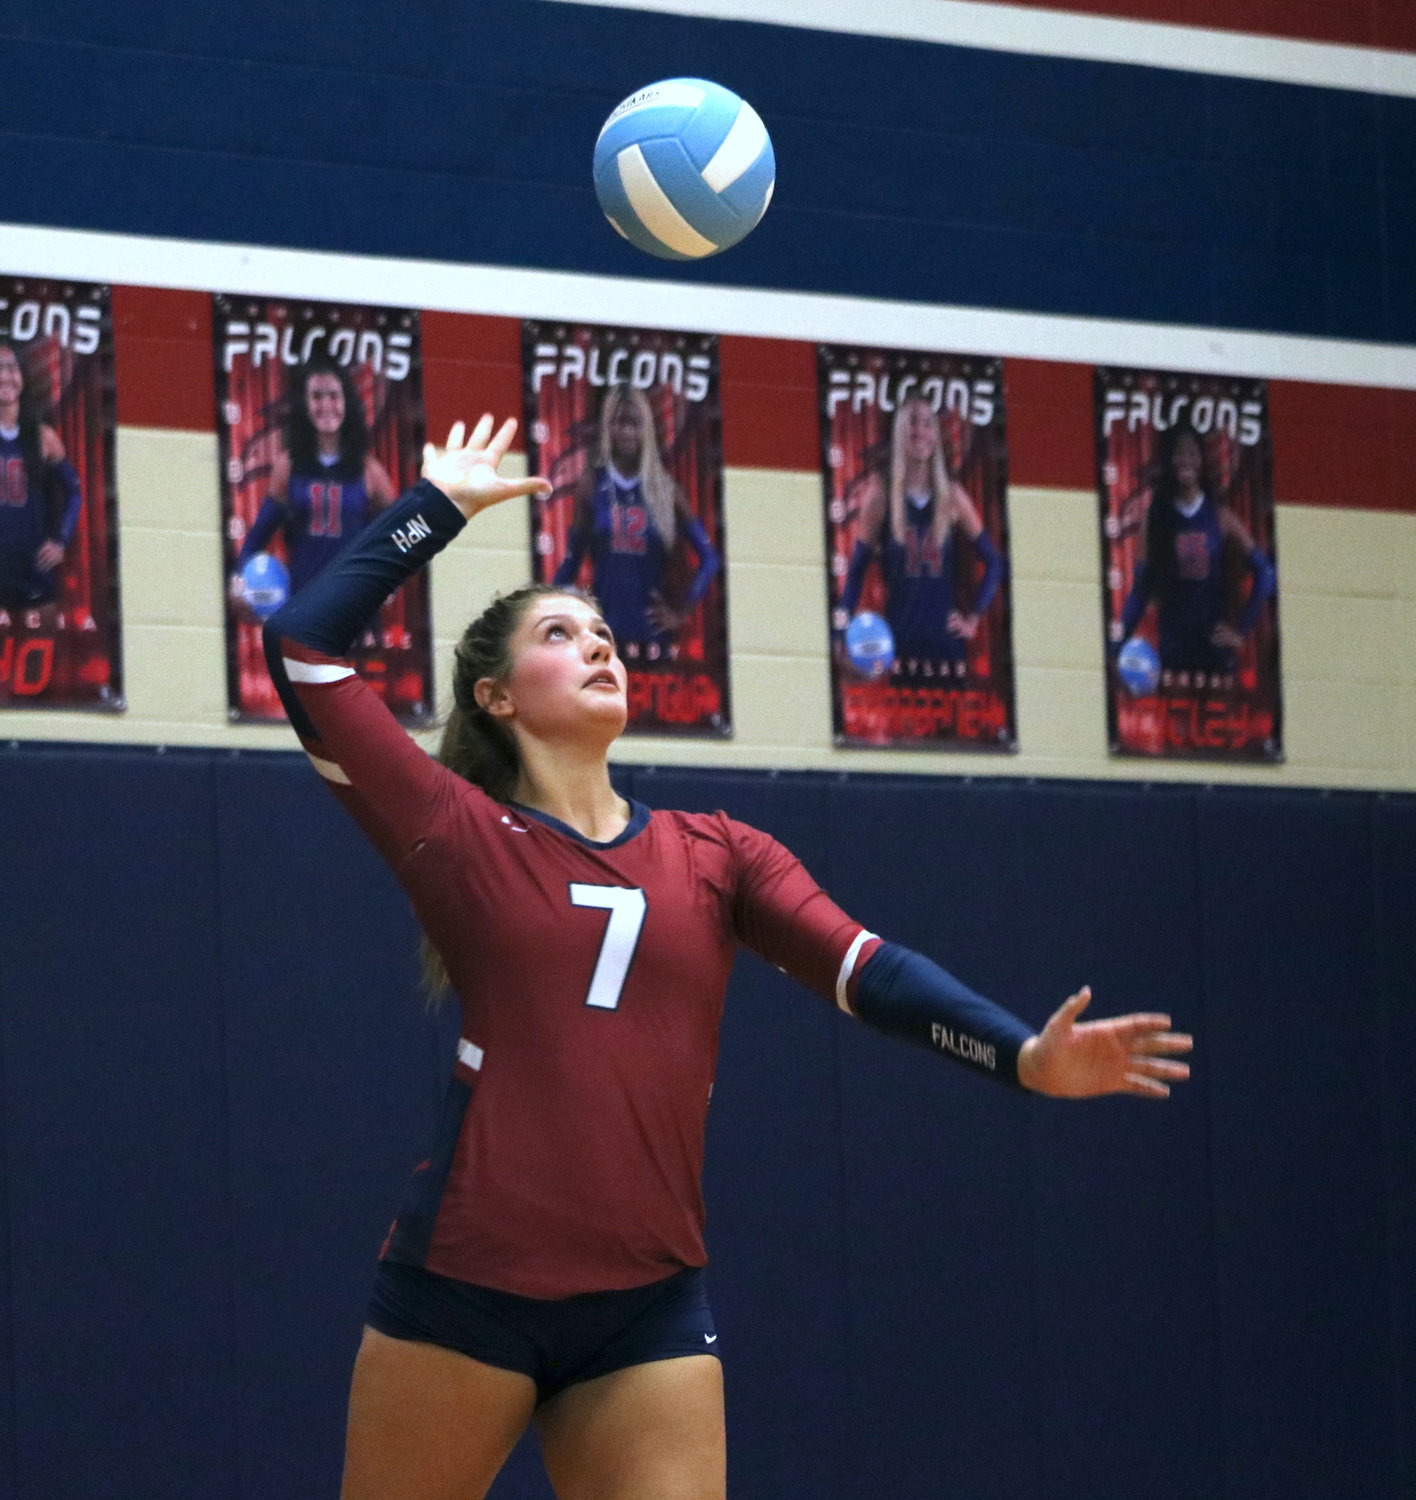 Tomkins’ Erica Dellesky serves during Tuesday’s match between Tompkins and Katy at the Tompkins gym.